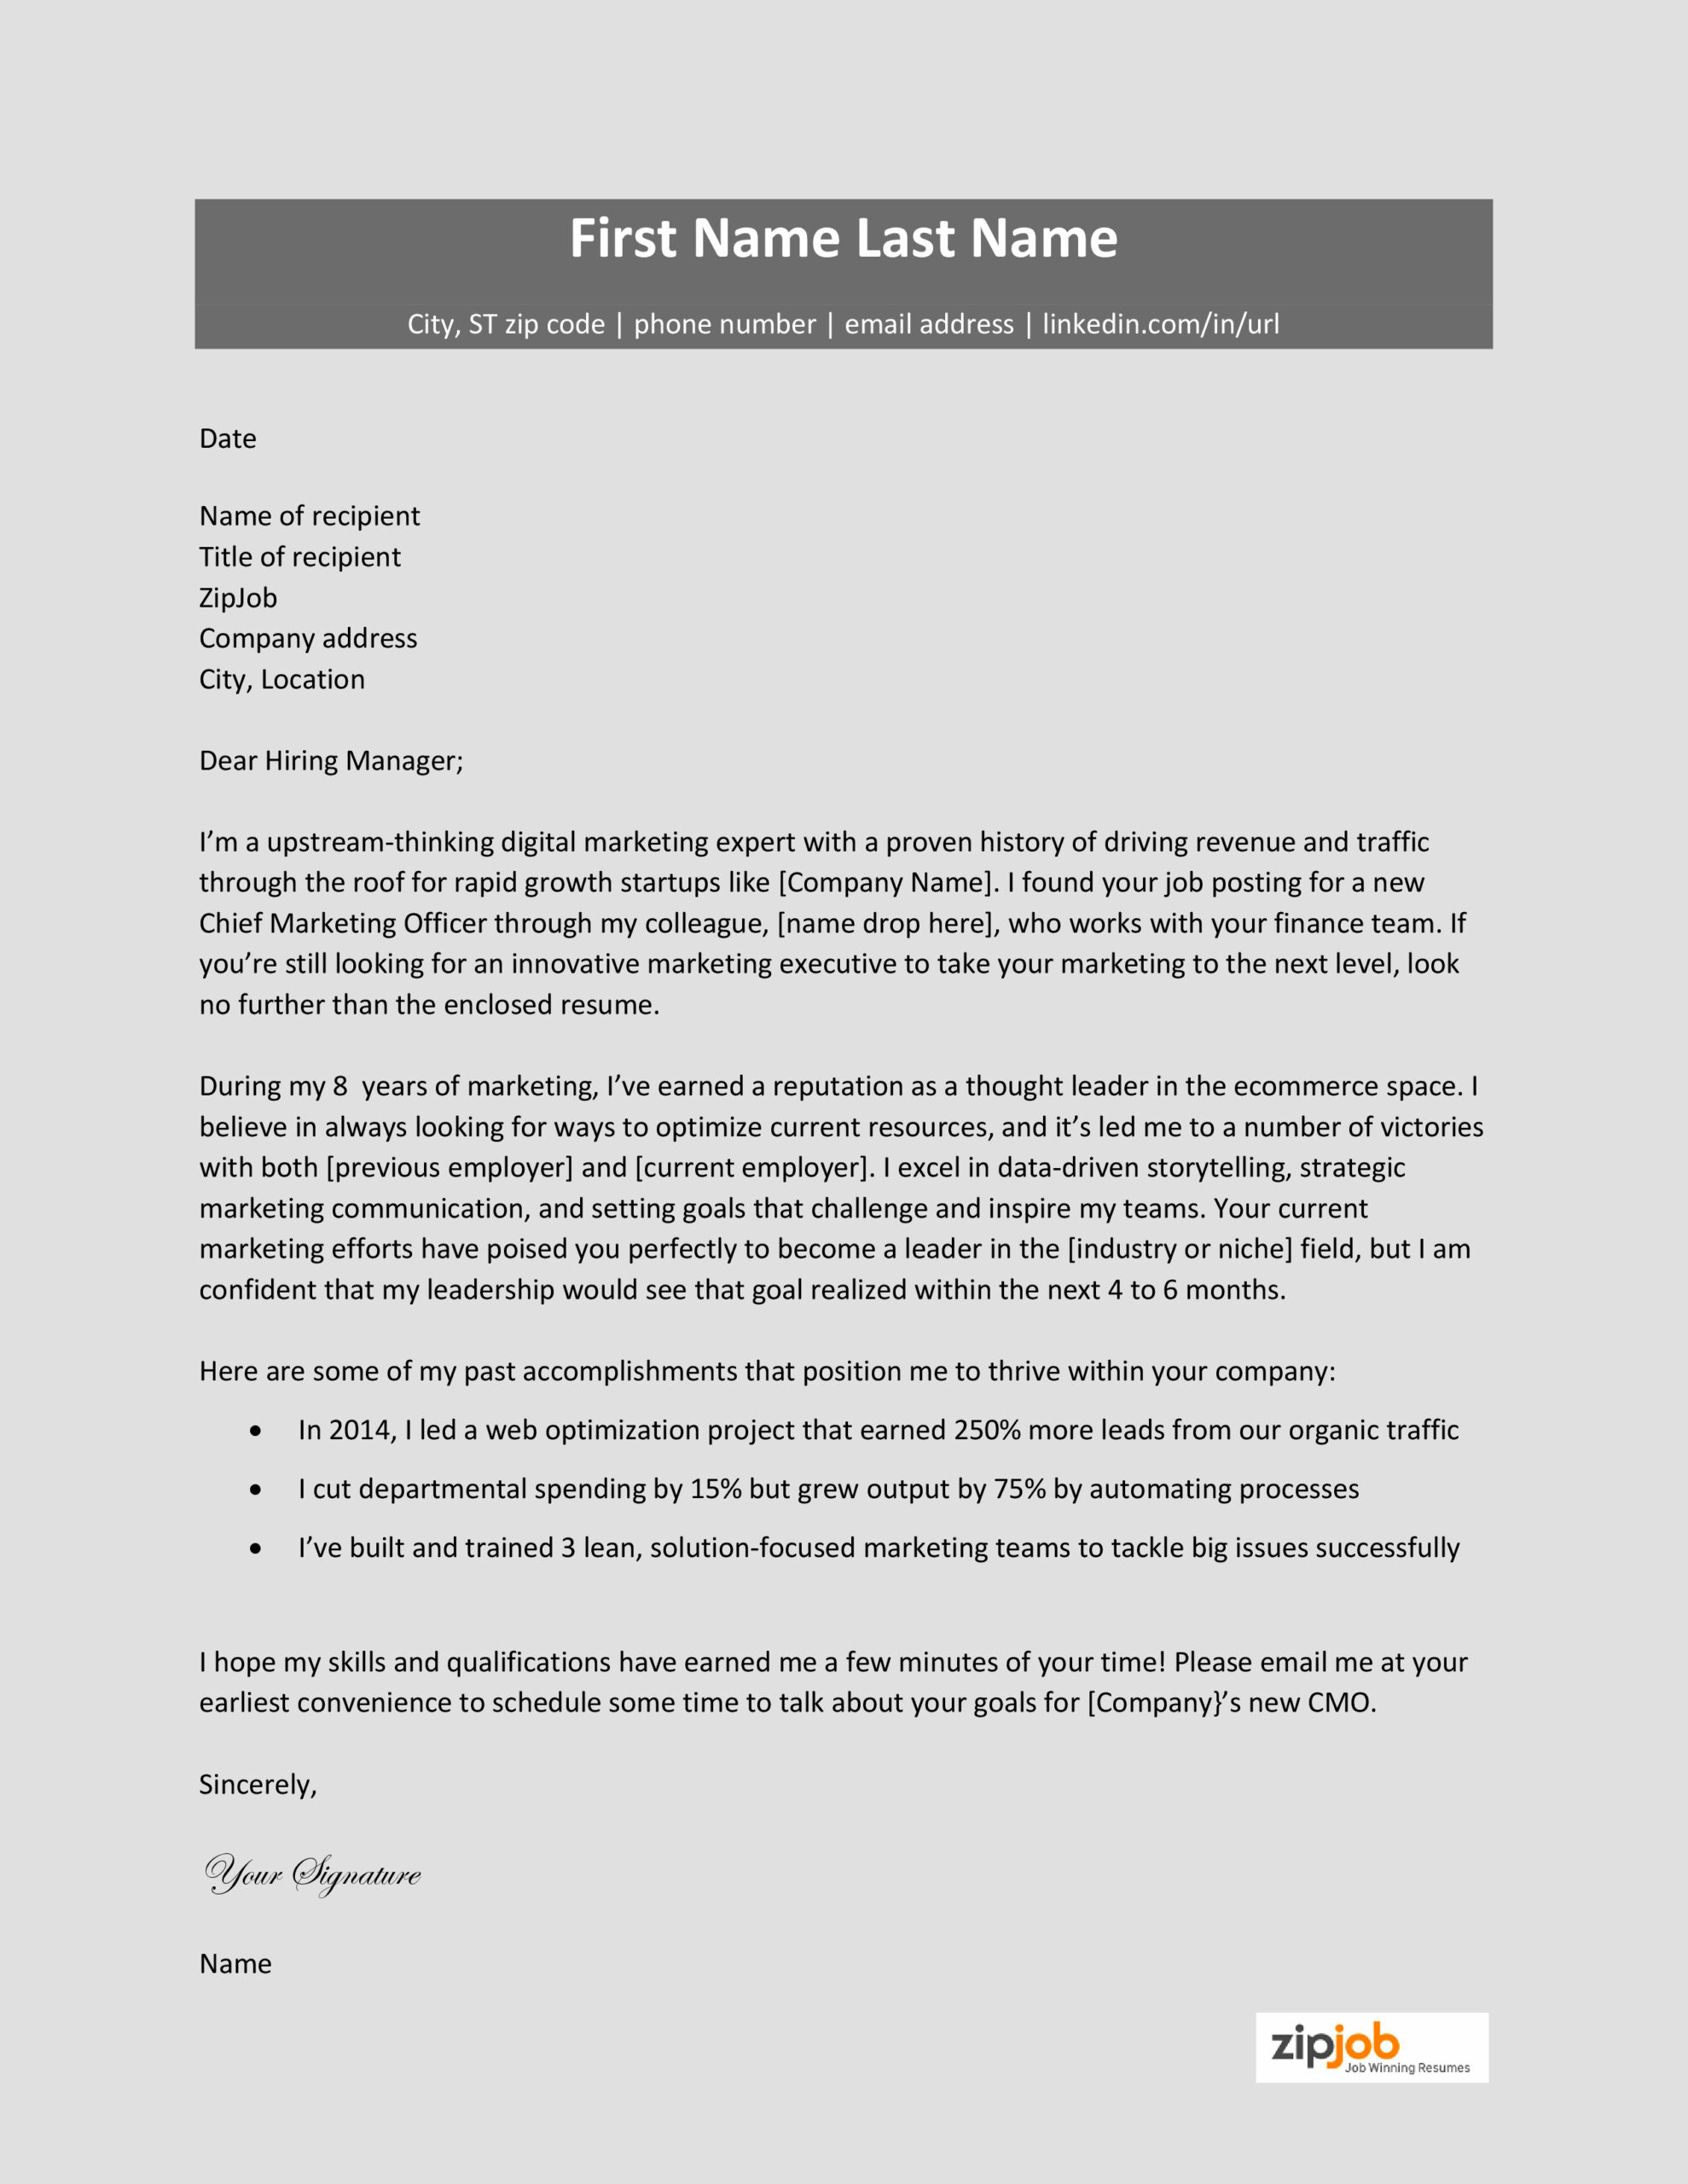 example of executive manager cover letter template